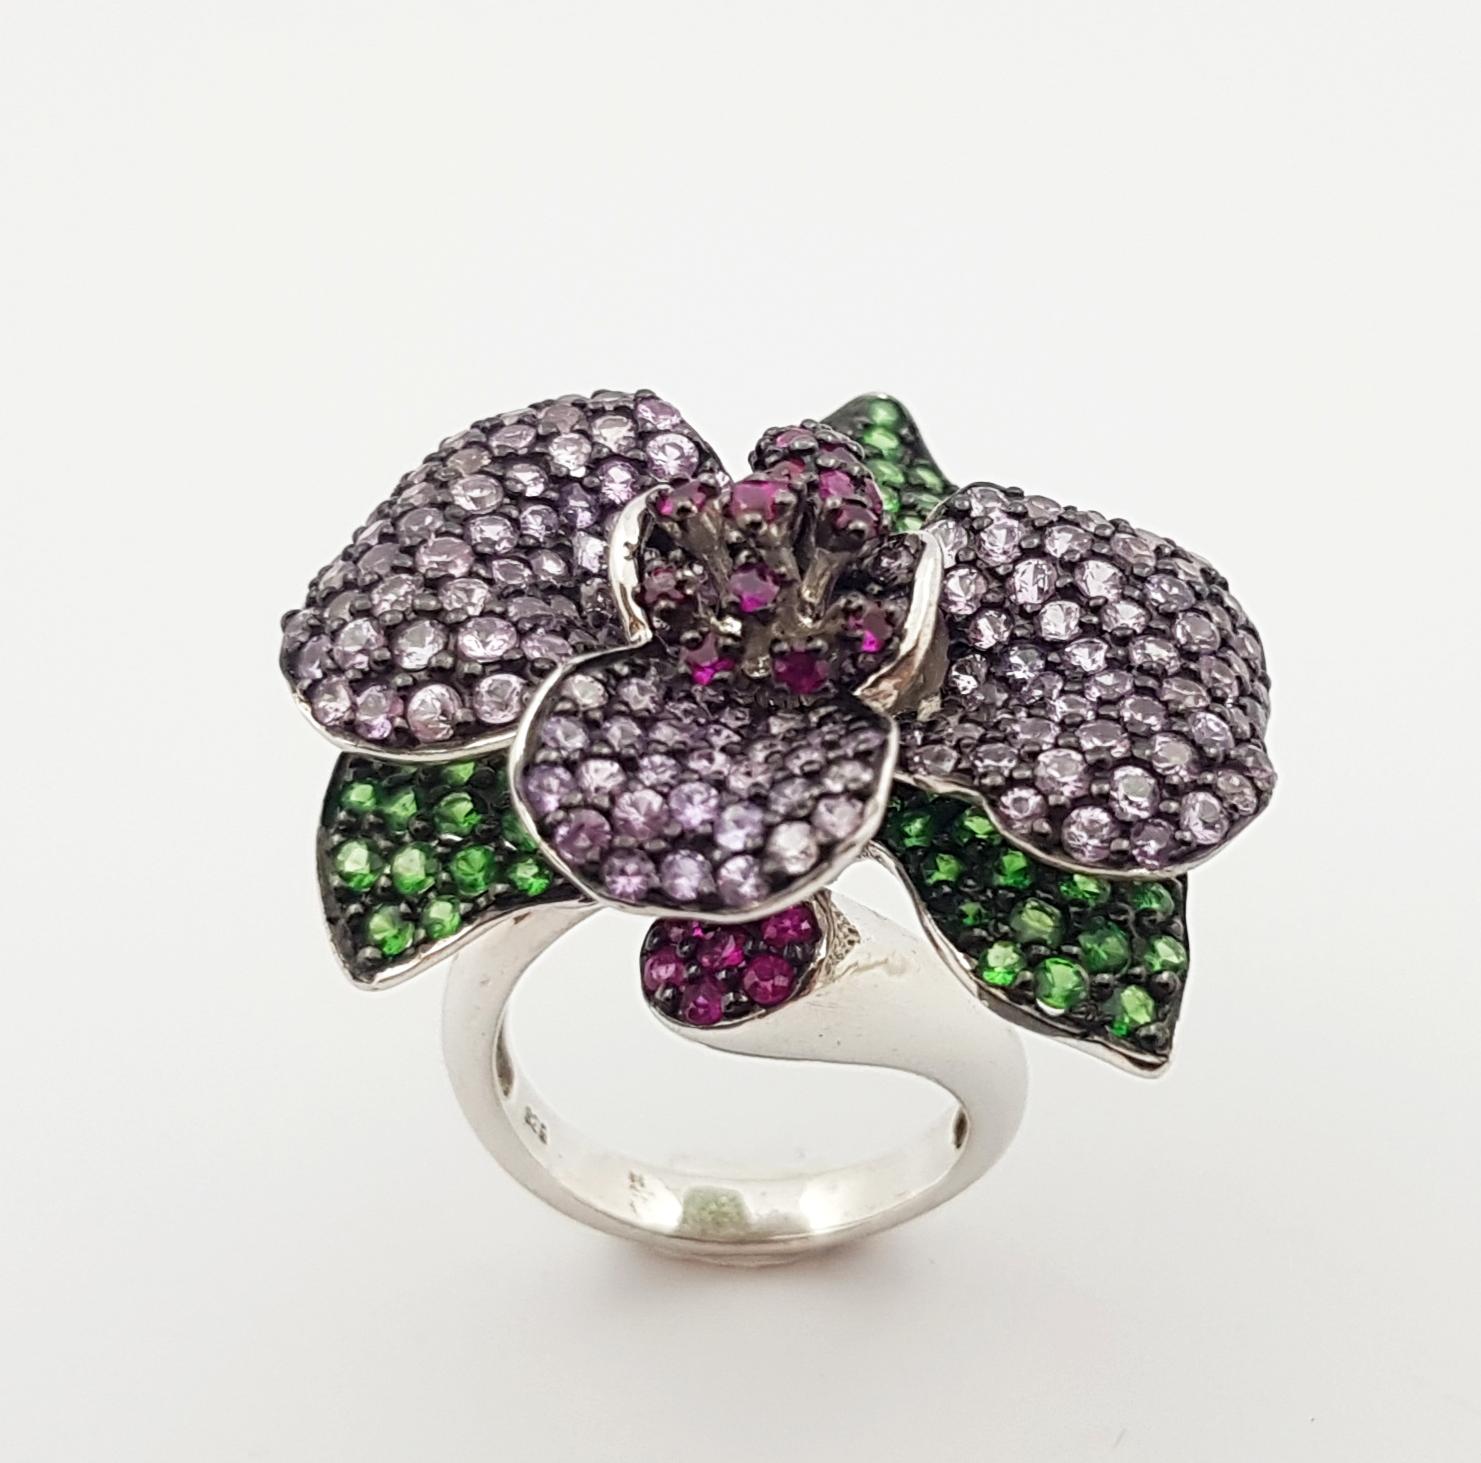 Ruby, Tsavorite and Pink Sapphire Ring set in Silver Settings

Width:  3.9 cm 
Length: 3.5 cm
Ring Size: 55
Total Weight: 17.92 grams

*Please note that the silver setting is plated with rhodium to promote shine and help prevent oxidation.  However,